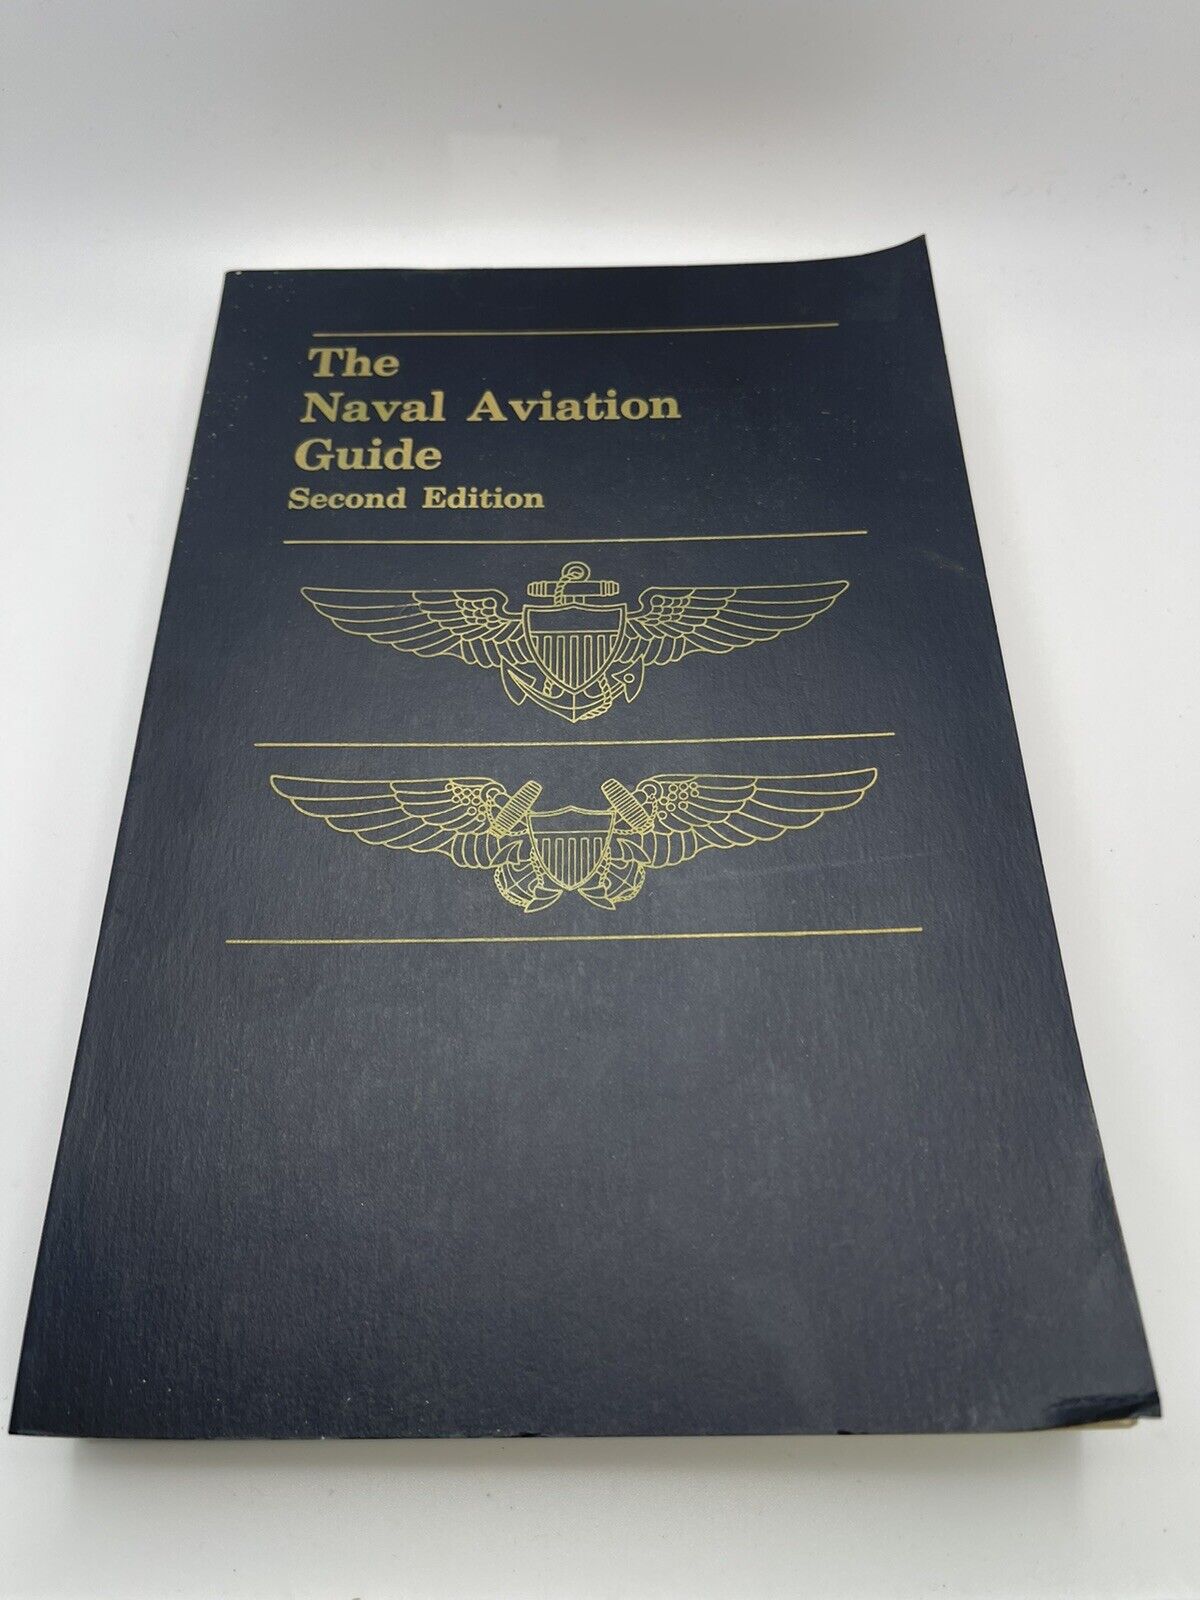 Naval Aviation Guide Second Edition, 1969 Clean Nice, USN, Vietnam Era Military